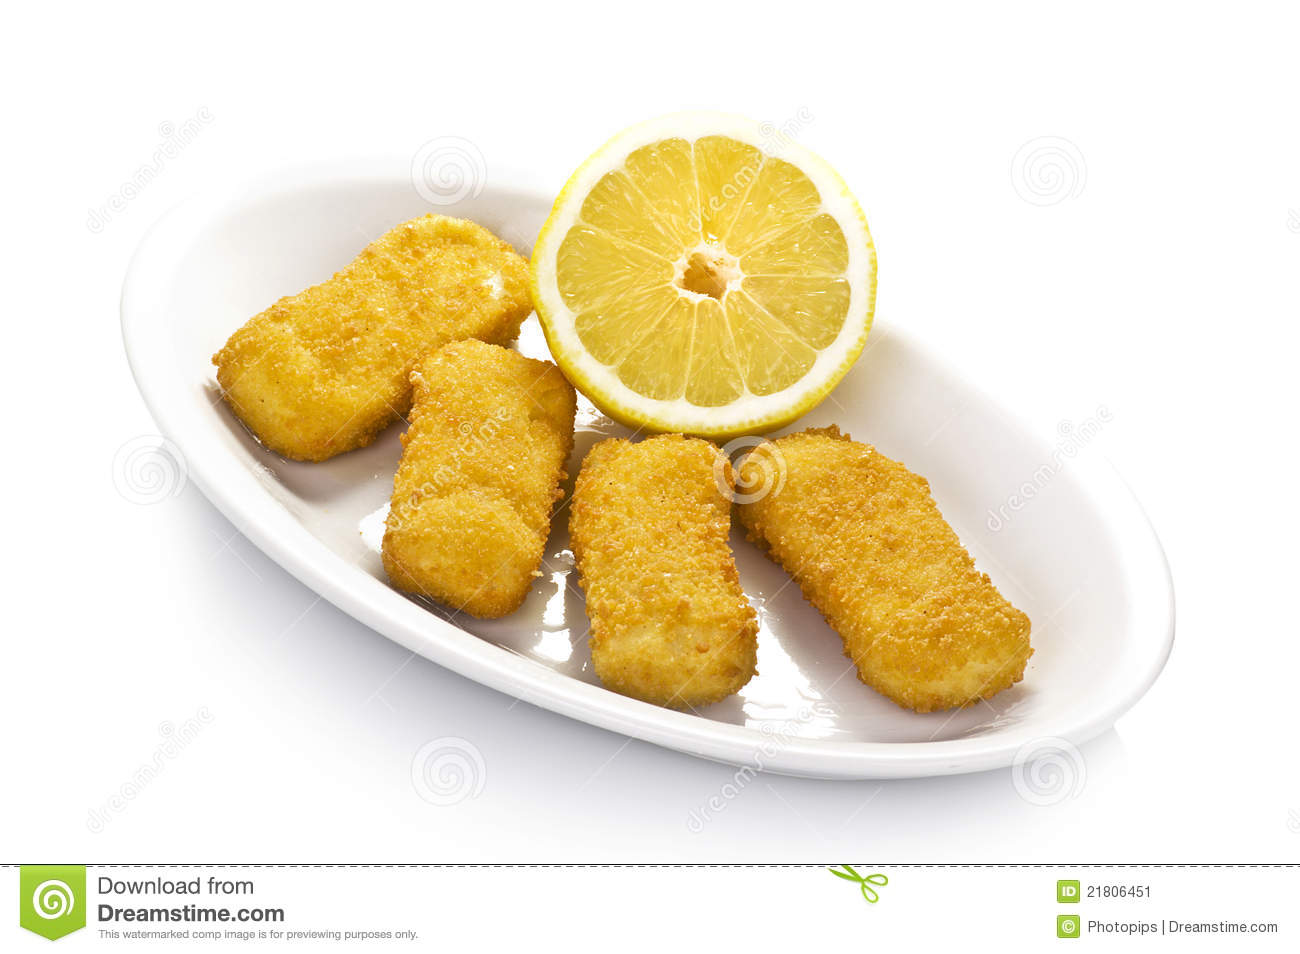 Chicken Fingers Stock Image   Image  21806451